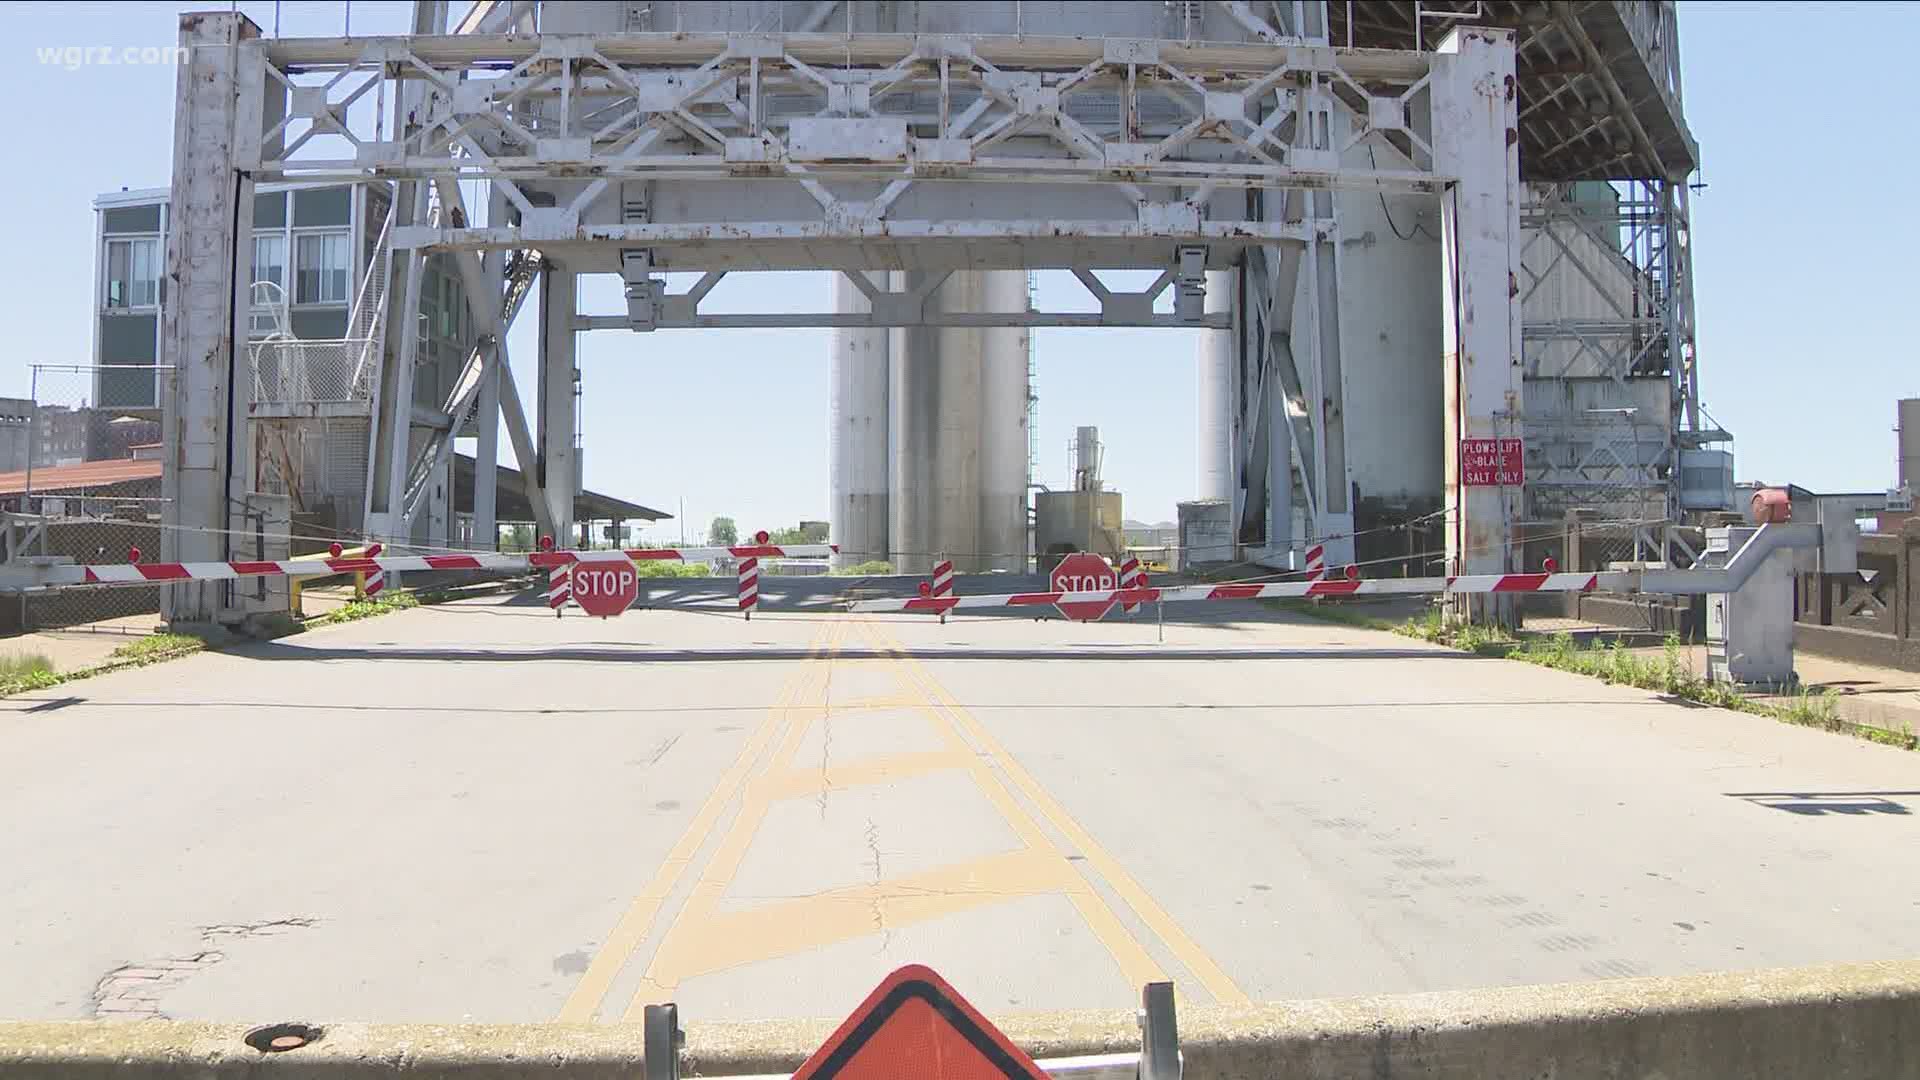 There are structural concerns with the Michigan Avenue Lift Bridge and some cables need to be repaired before it can be used again. It will likely be several months.